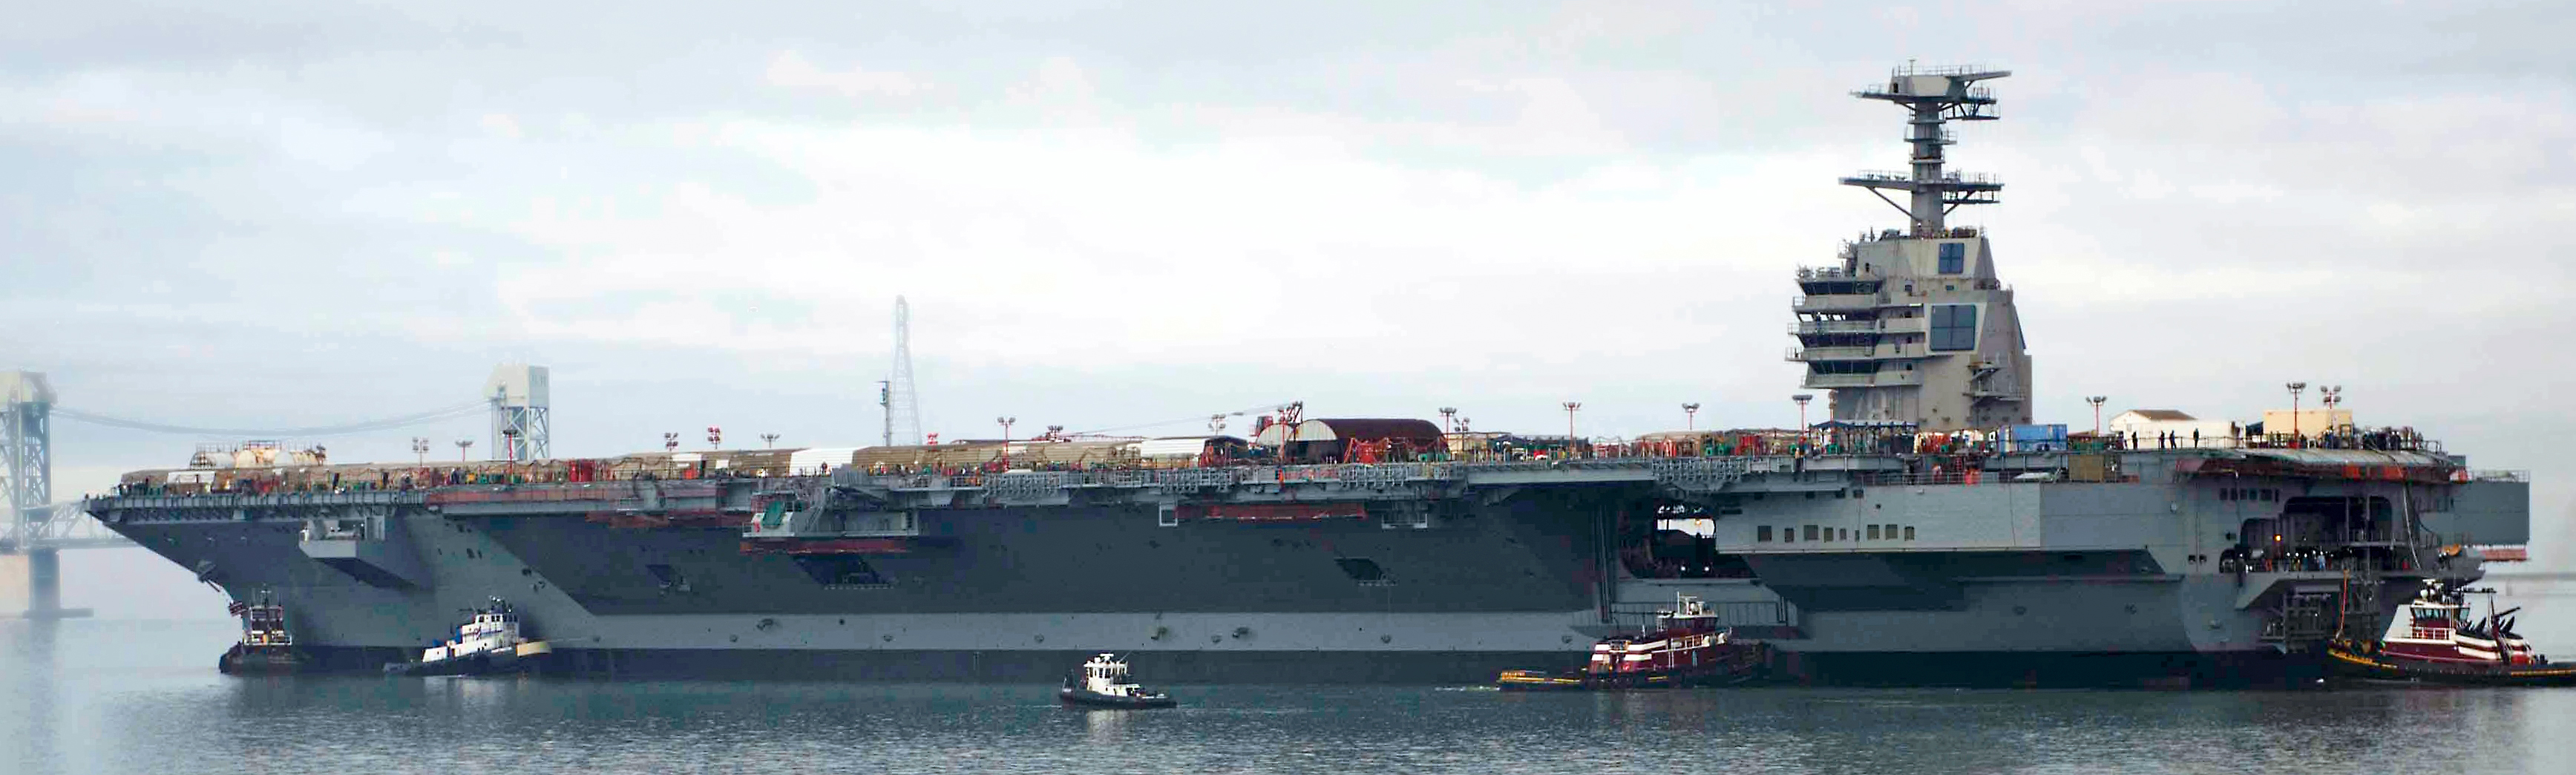 USS_Gerald_R._Ford_(CVN-78)_on_the_James_River_in_2013.JPG